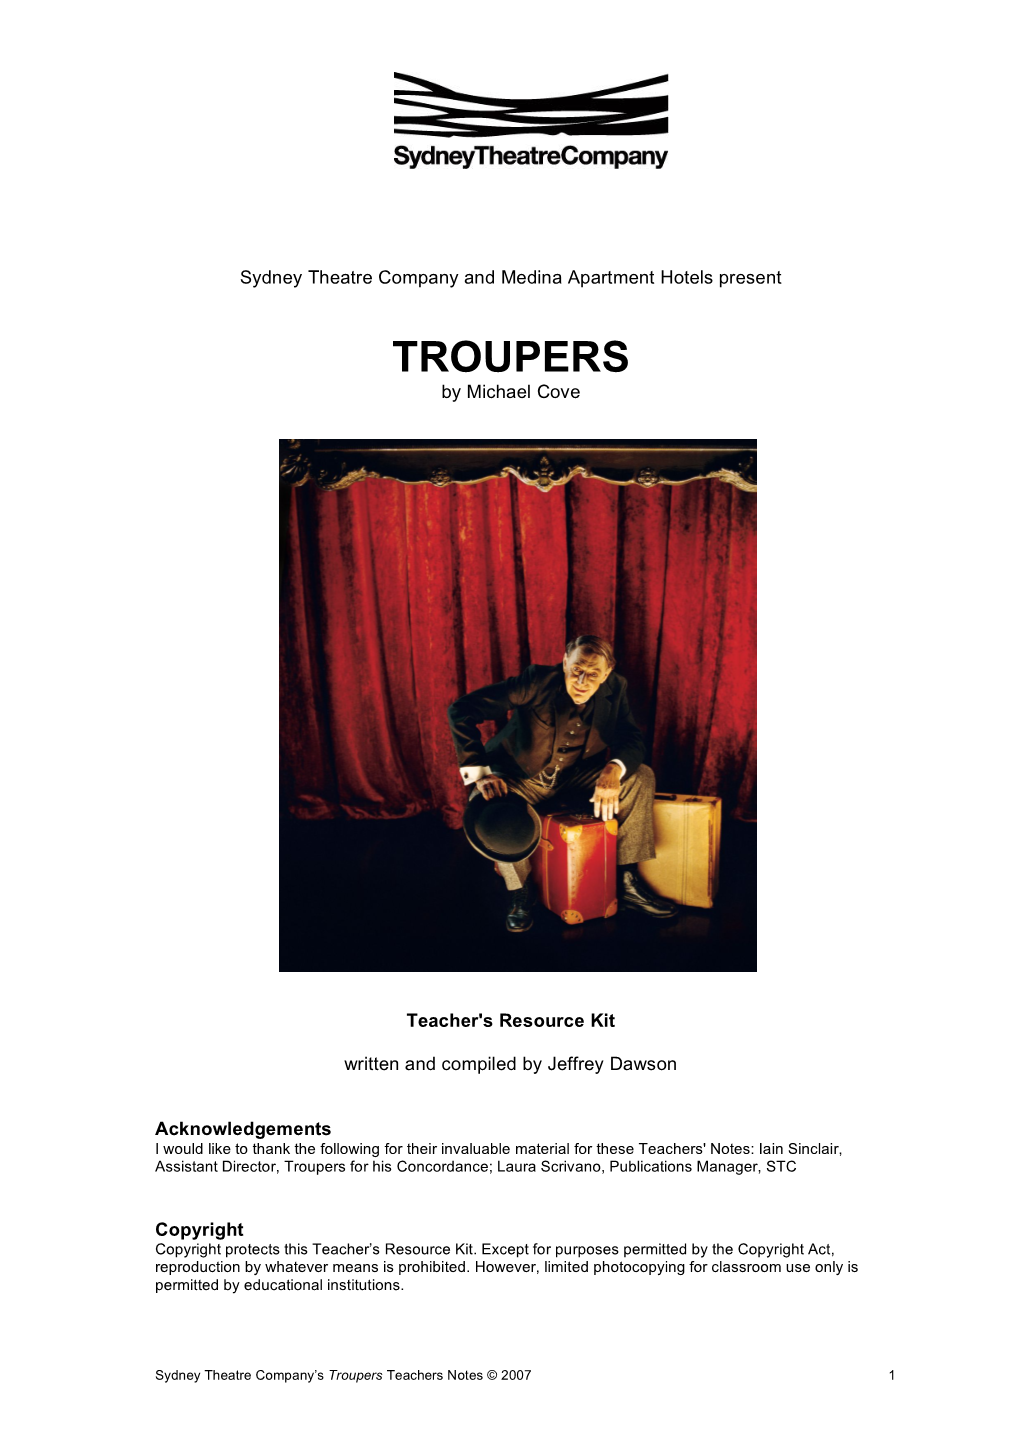 TROUPERS by Michael Cove